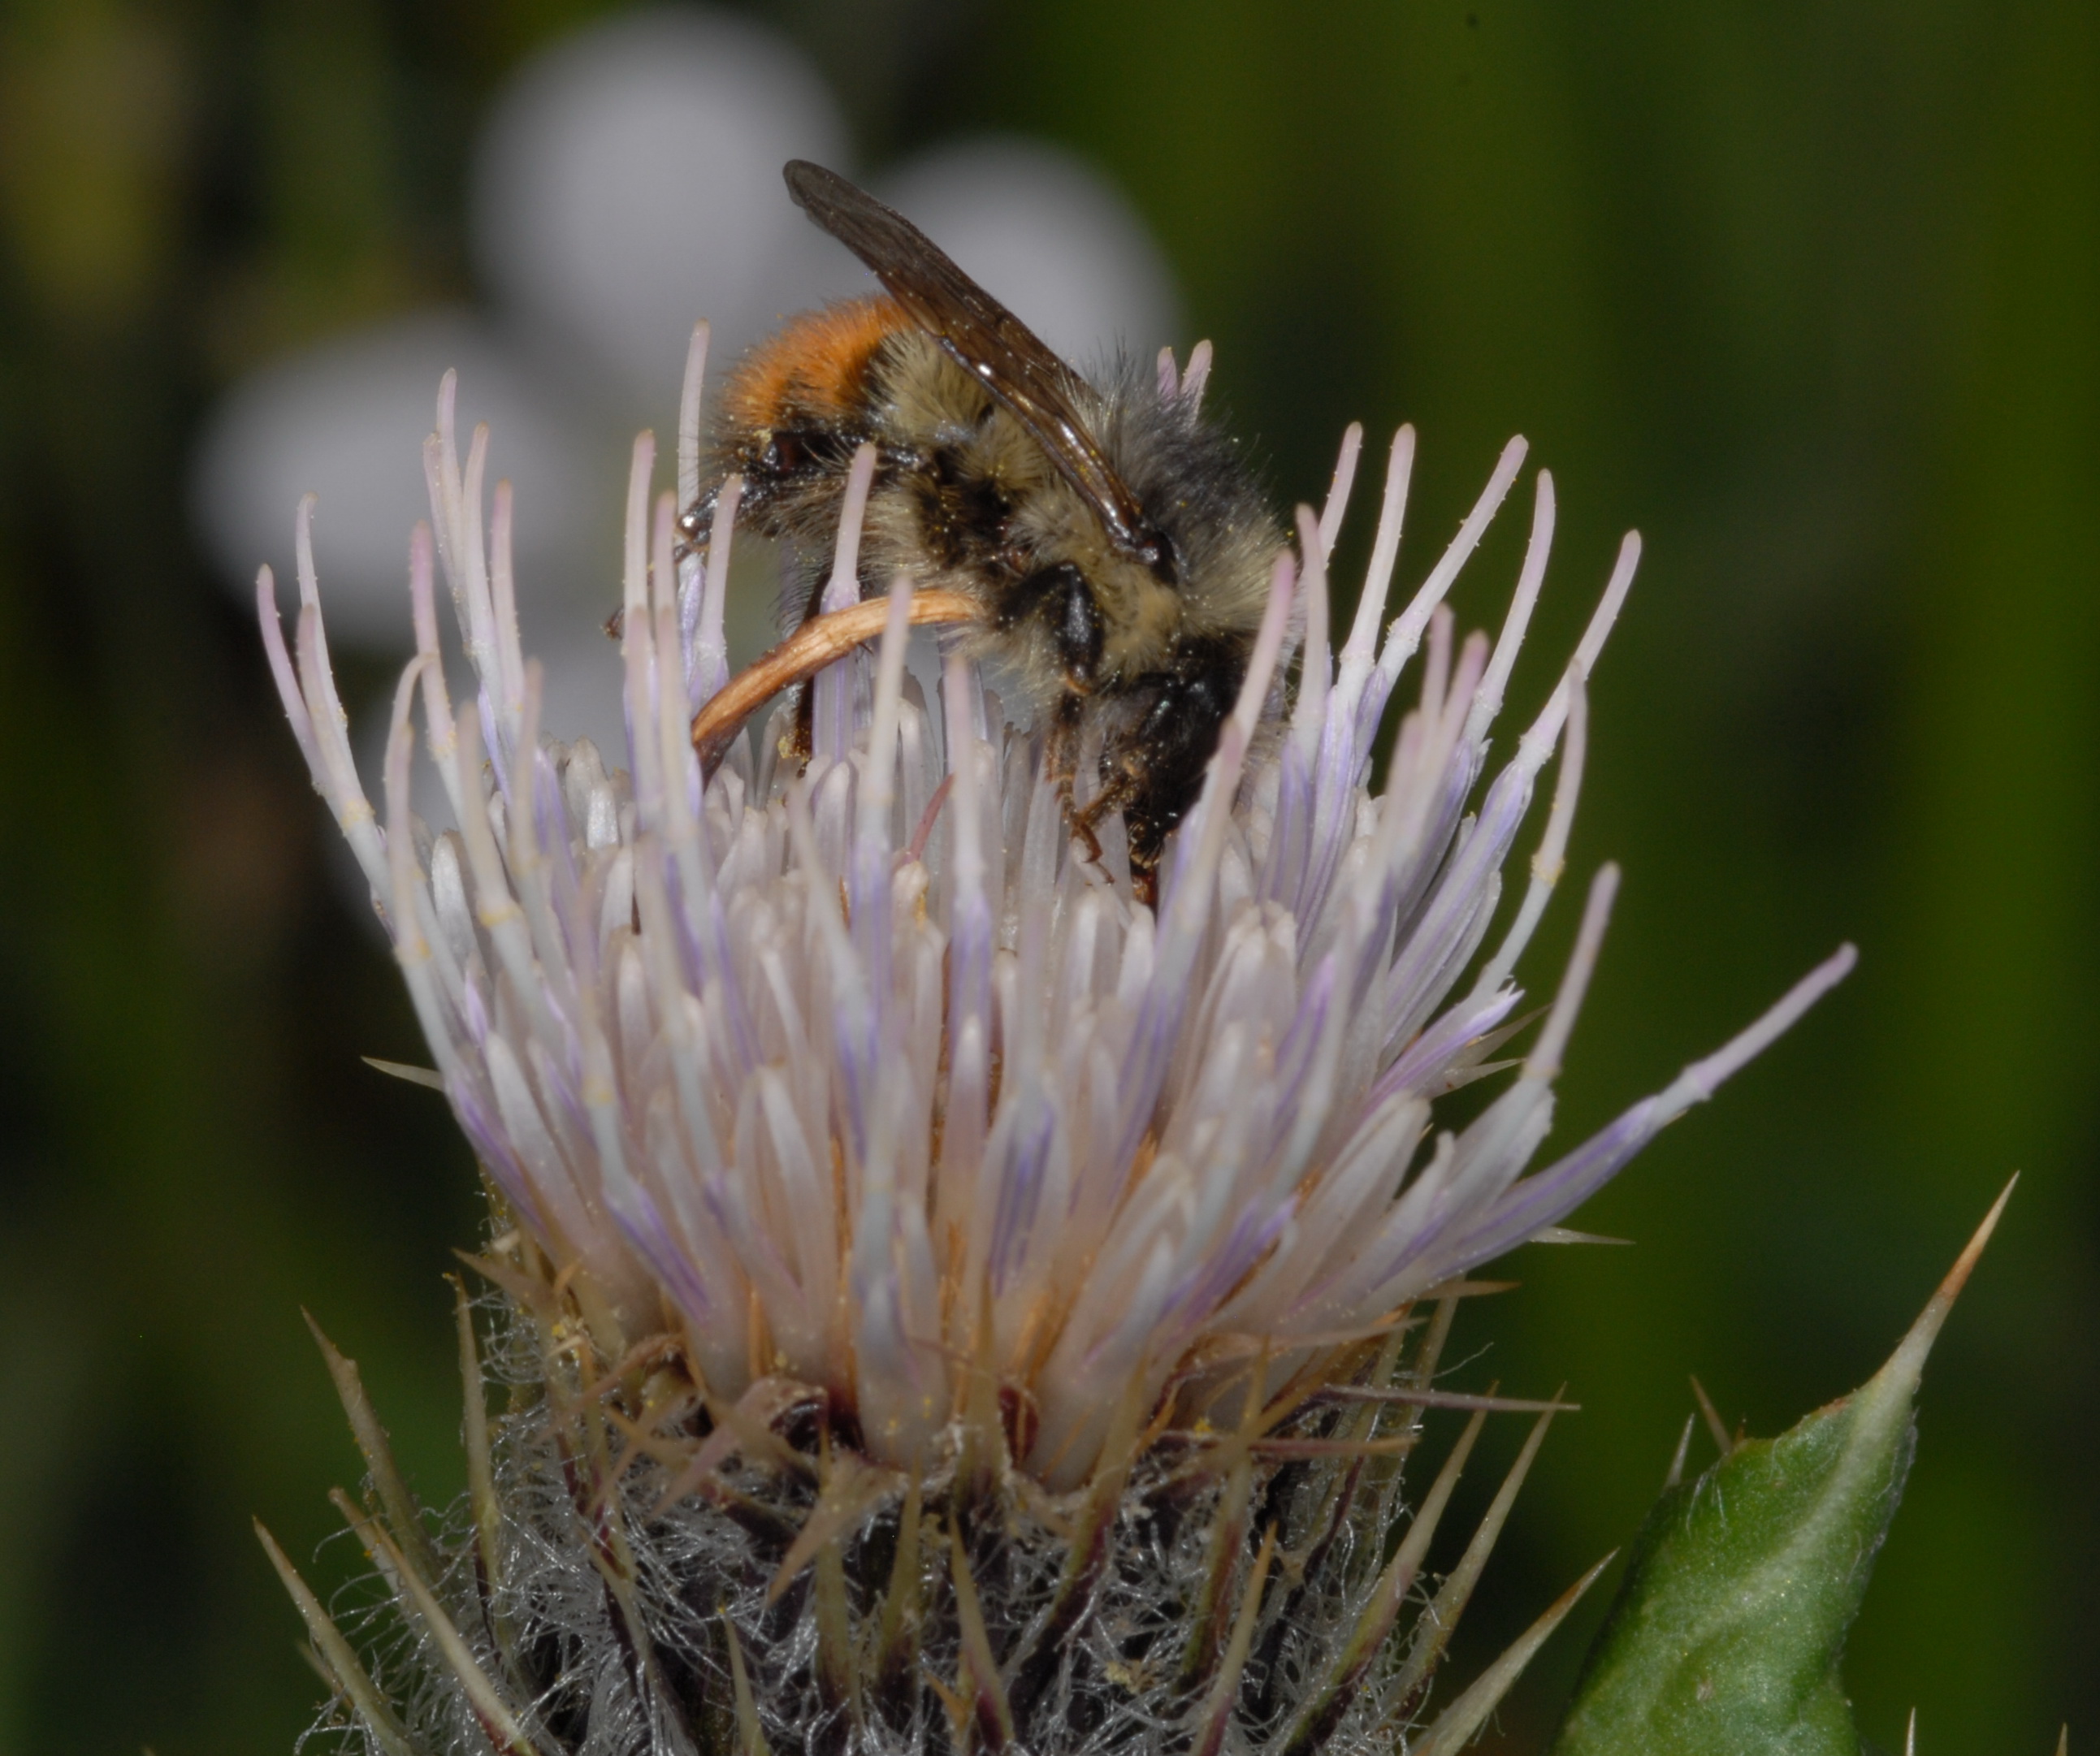 A bumblebee in search of nectar on a thistle flower. Photo: David Inouye, University of Maryland. Click image to download hi-res version.